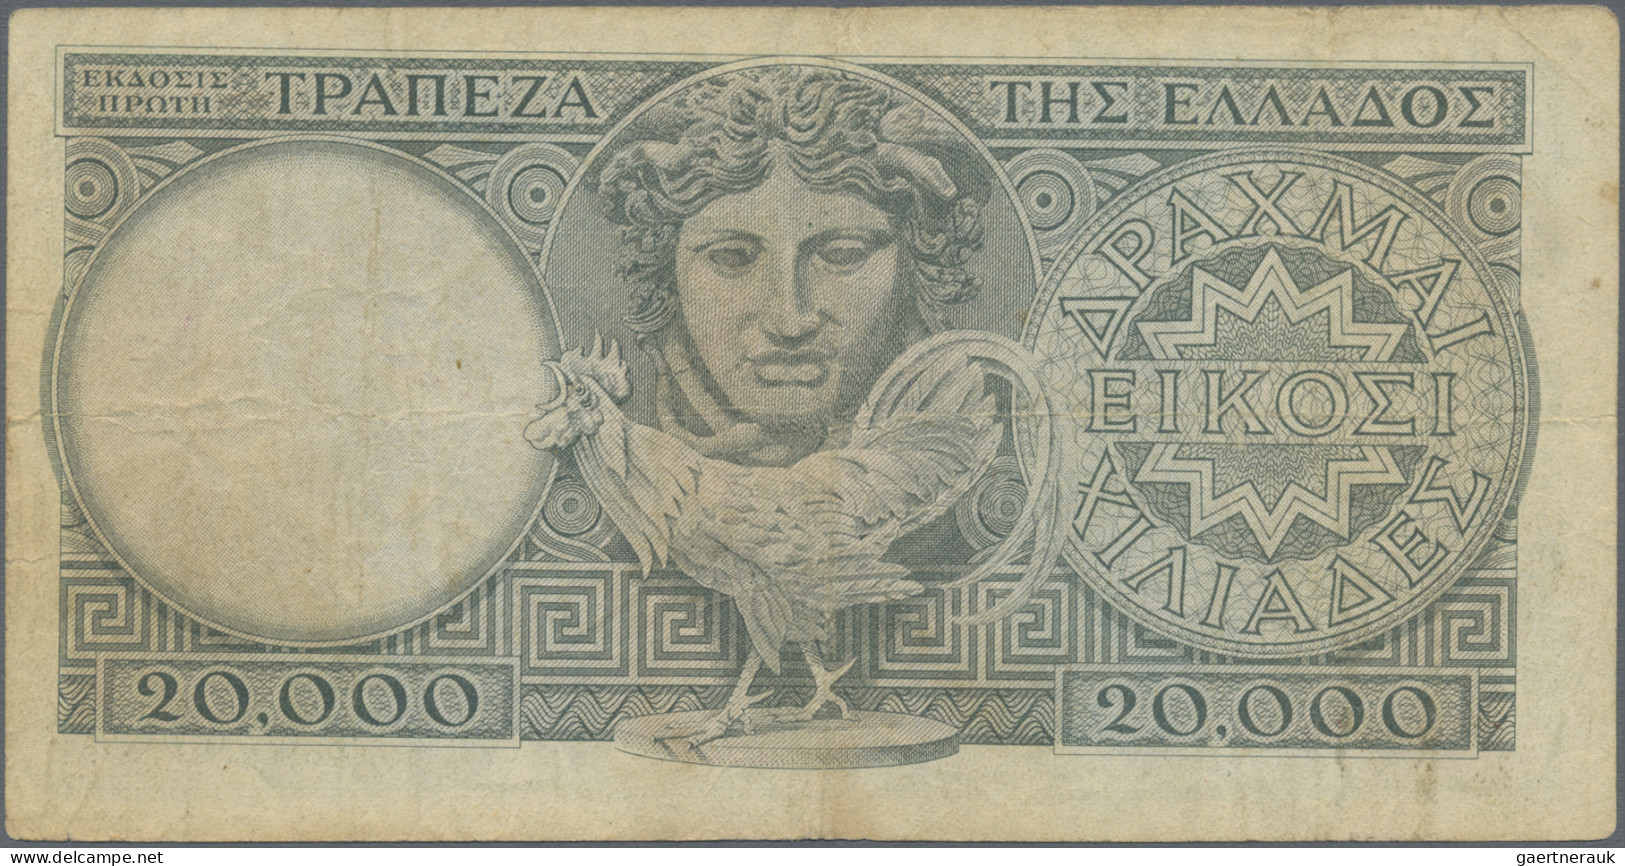 Greece: Bank of Greece, lot with 5 banknotes, series 1945-1947, with 5.000 Drach